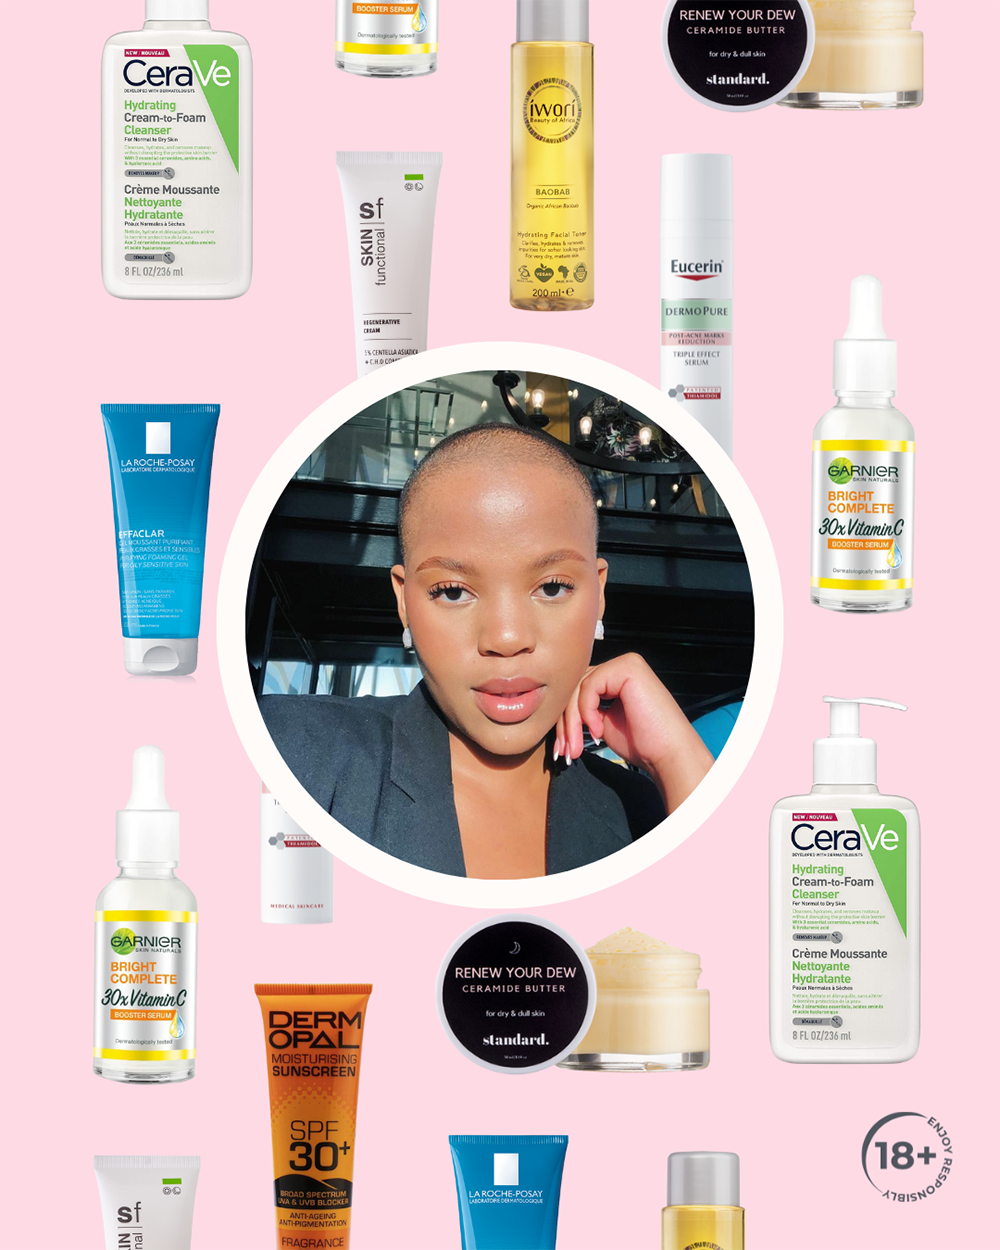 zithobe macheli, south african influencer, beauty products, cosmetics, skincare, skinfluencer, skinfluencers, beauty influencers, beauty influencer, skincare routine, skincare routines, clean beauty, brutal fruit, the suite, the suite edit